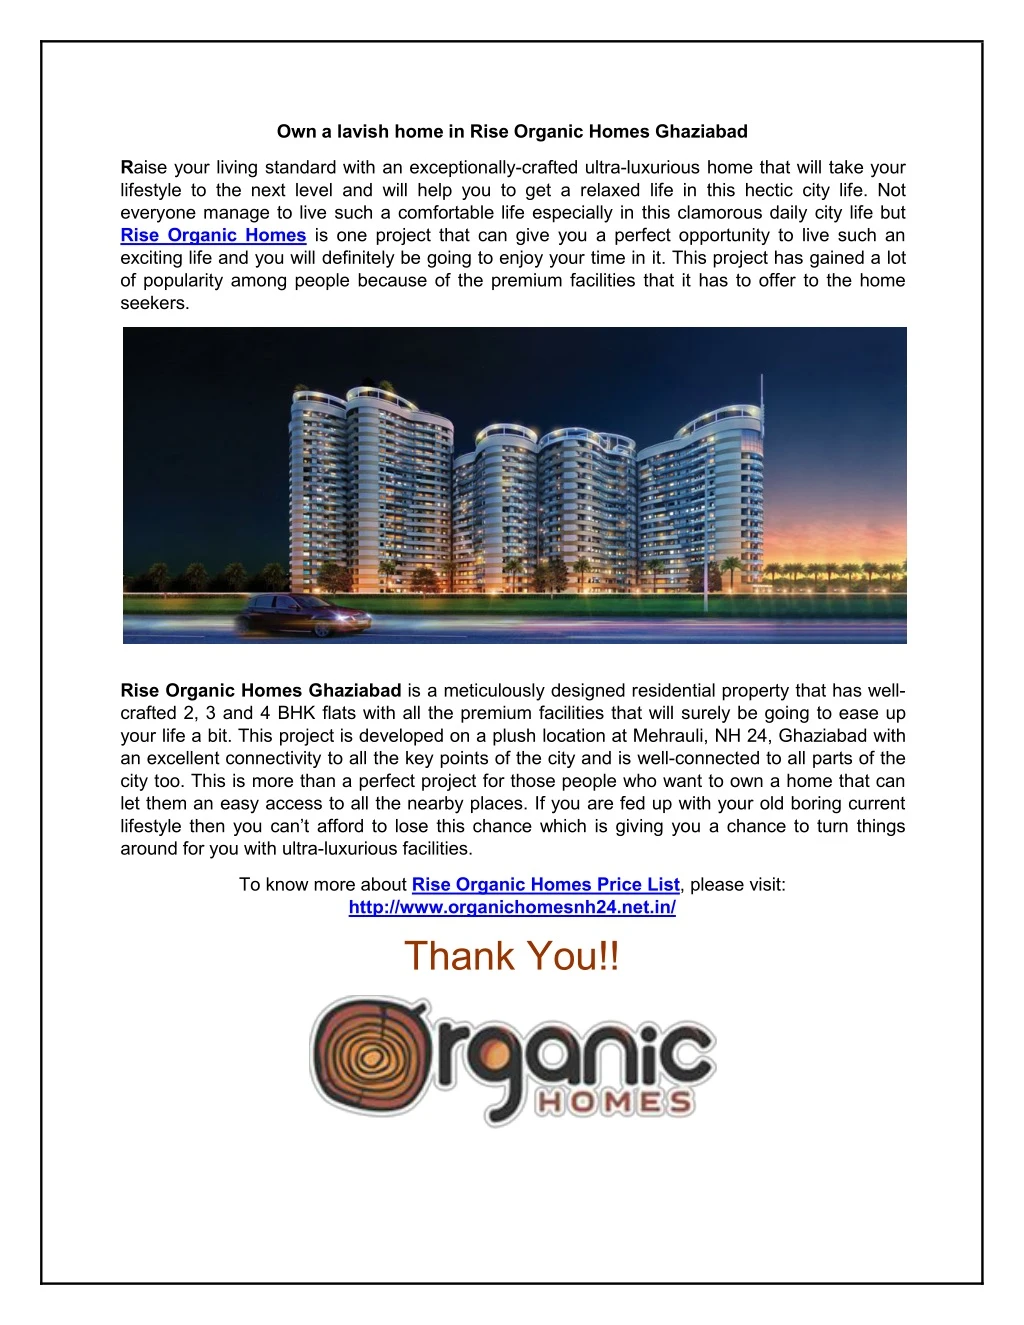 own a lavish home in rise organic homes ghaziabad